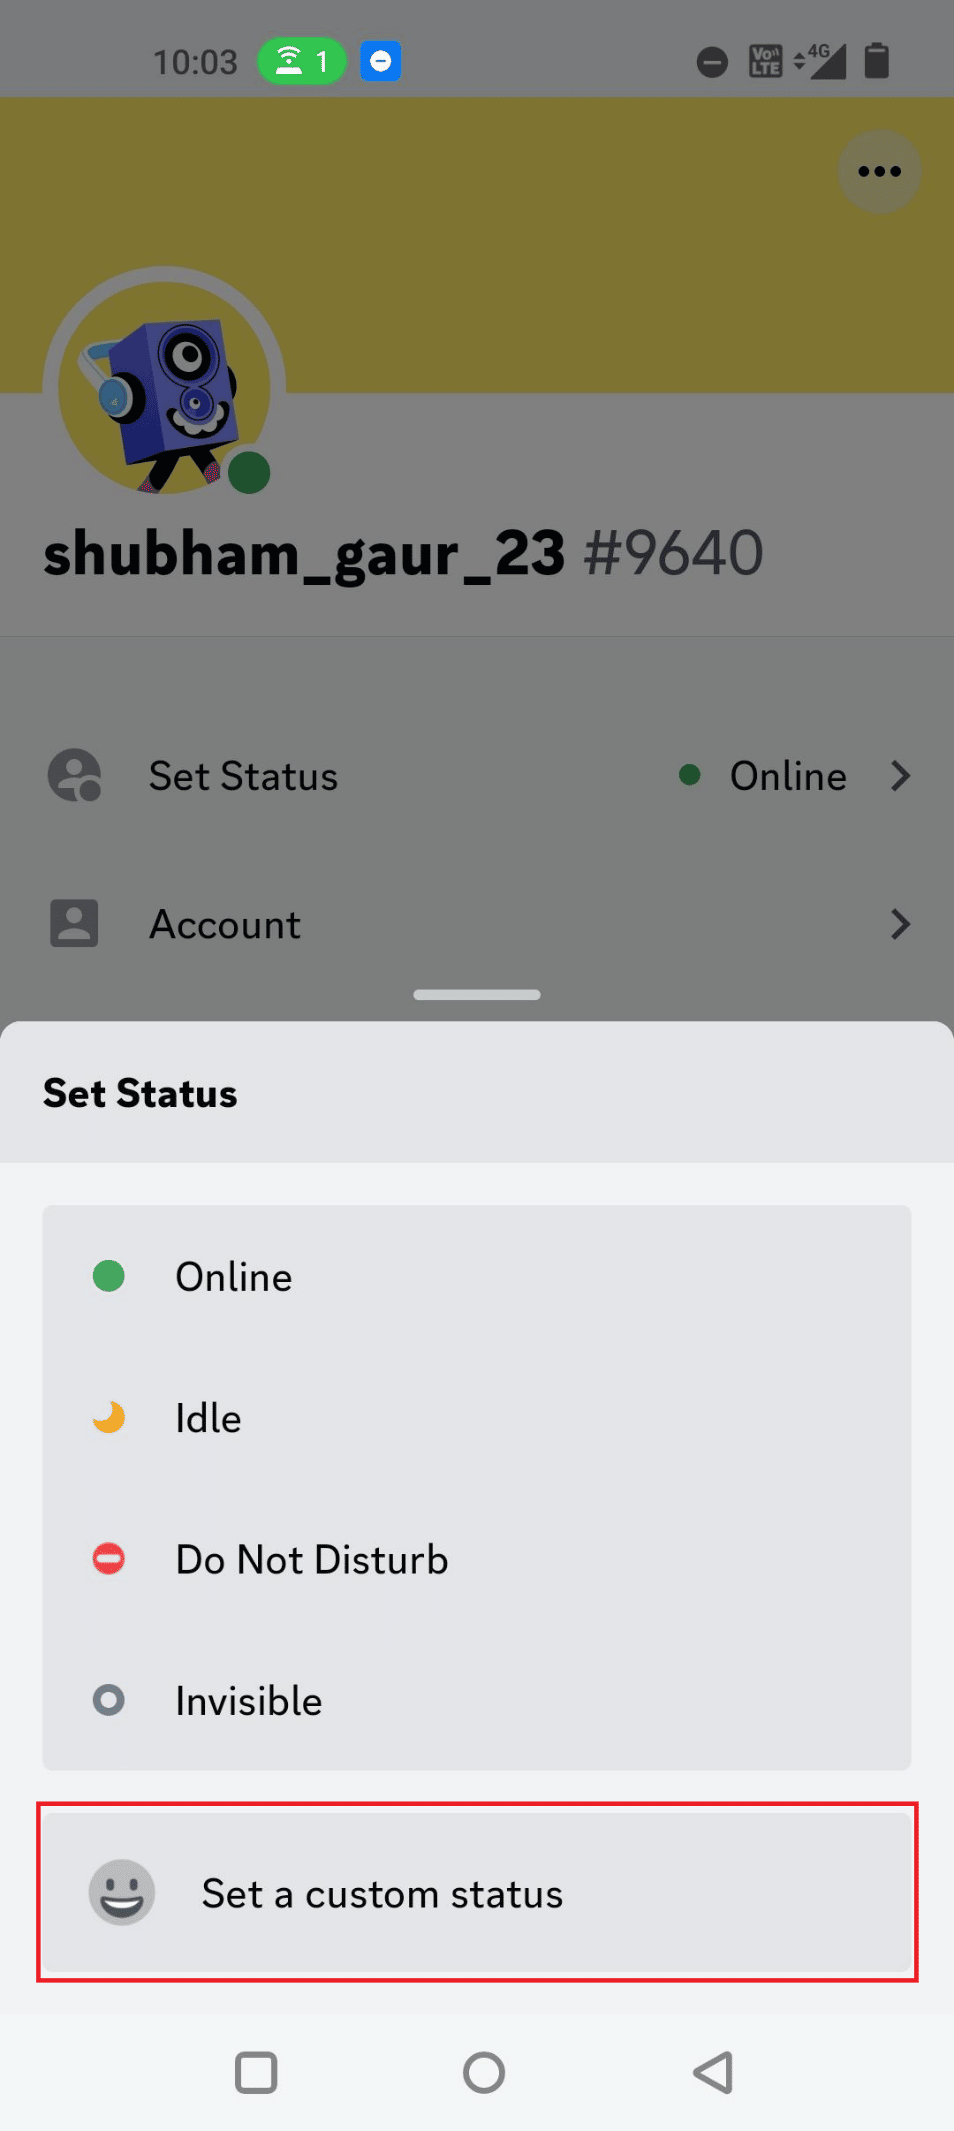 Tap on Set a custom status option. This option appears at the bottom of the window.